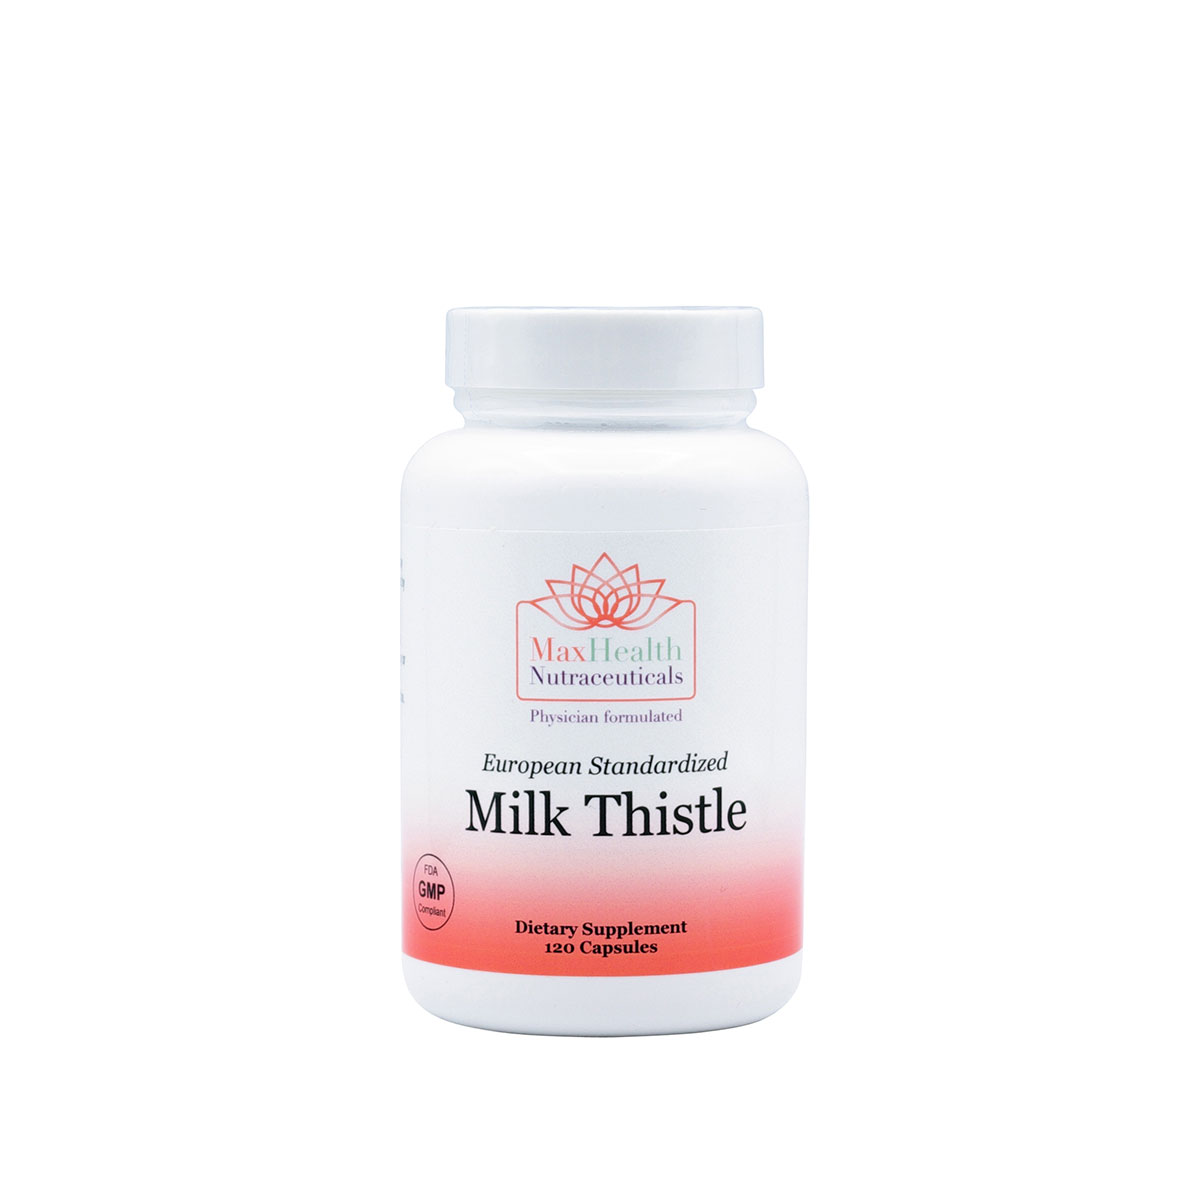 11Milk Thistle Plus Turmeric and Artichoke Extracts